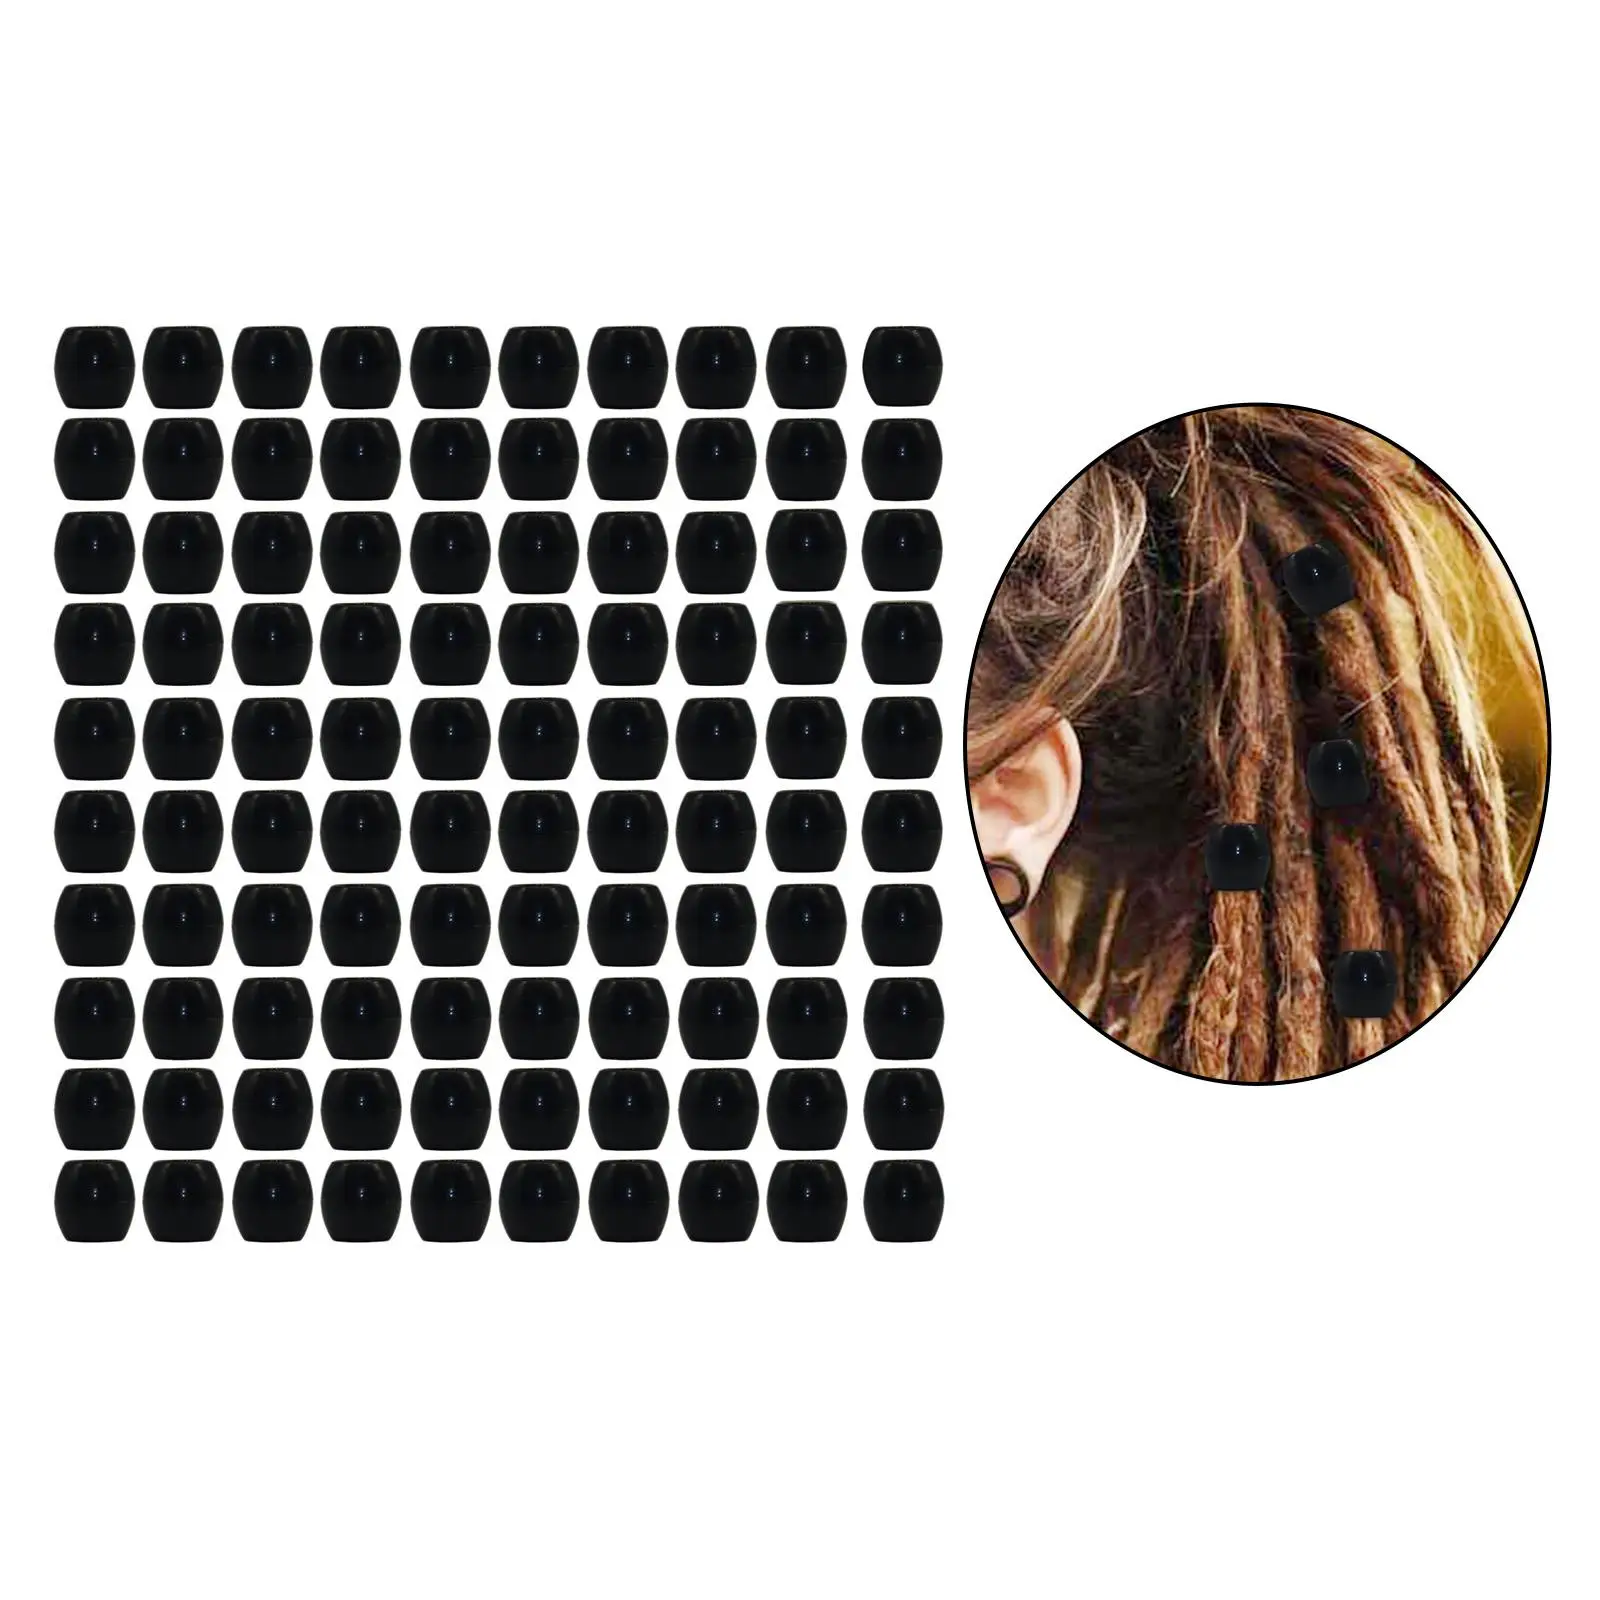 100Pcs Hair  Beads Beauty Supplies Black ,10mm Accessories Decoration  , Beads  Wedding Party Make 